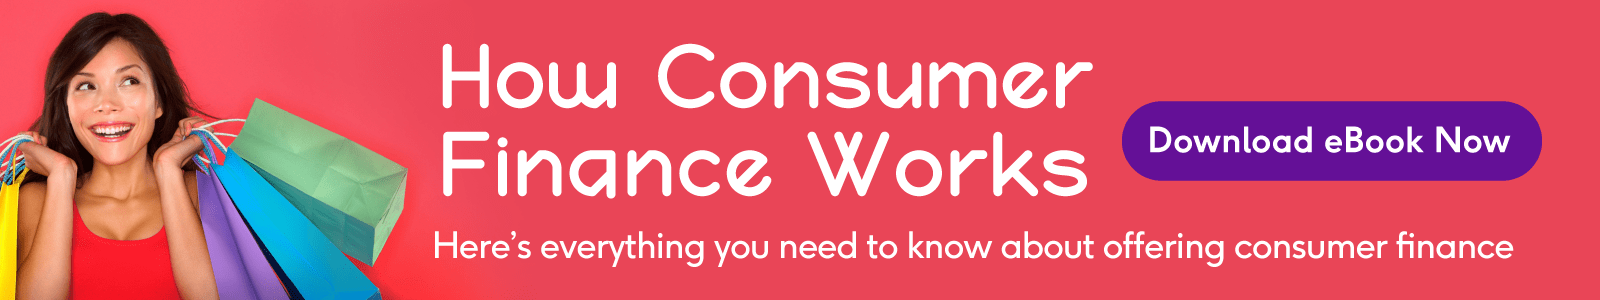 How Consumer Finance Works: Here's everything you need to know about offering consumer finance - Download eBook Now